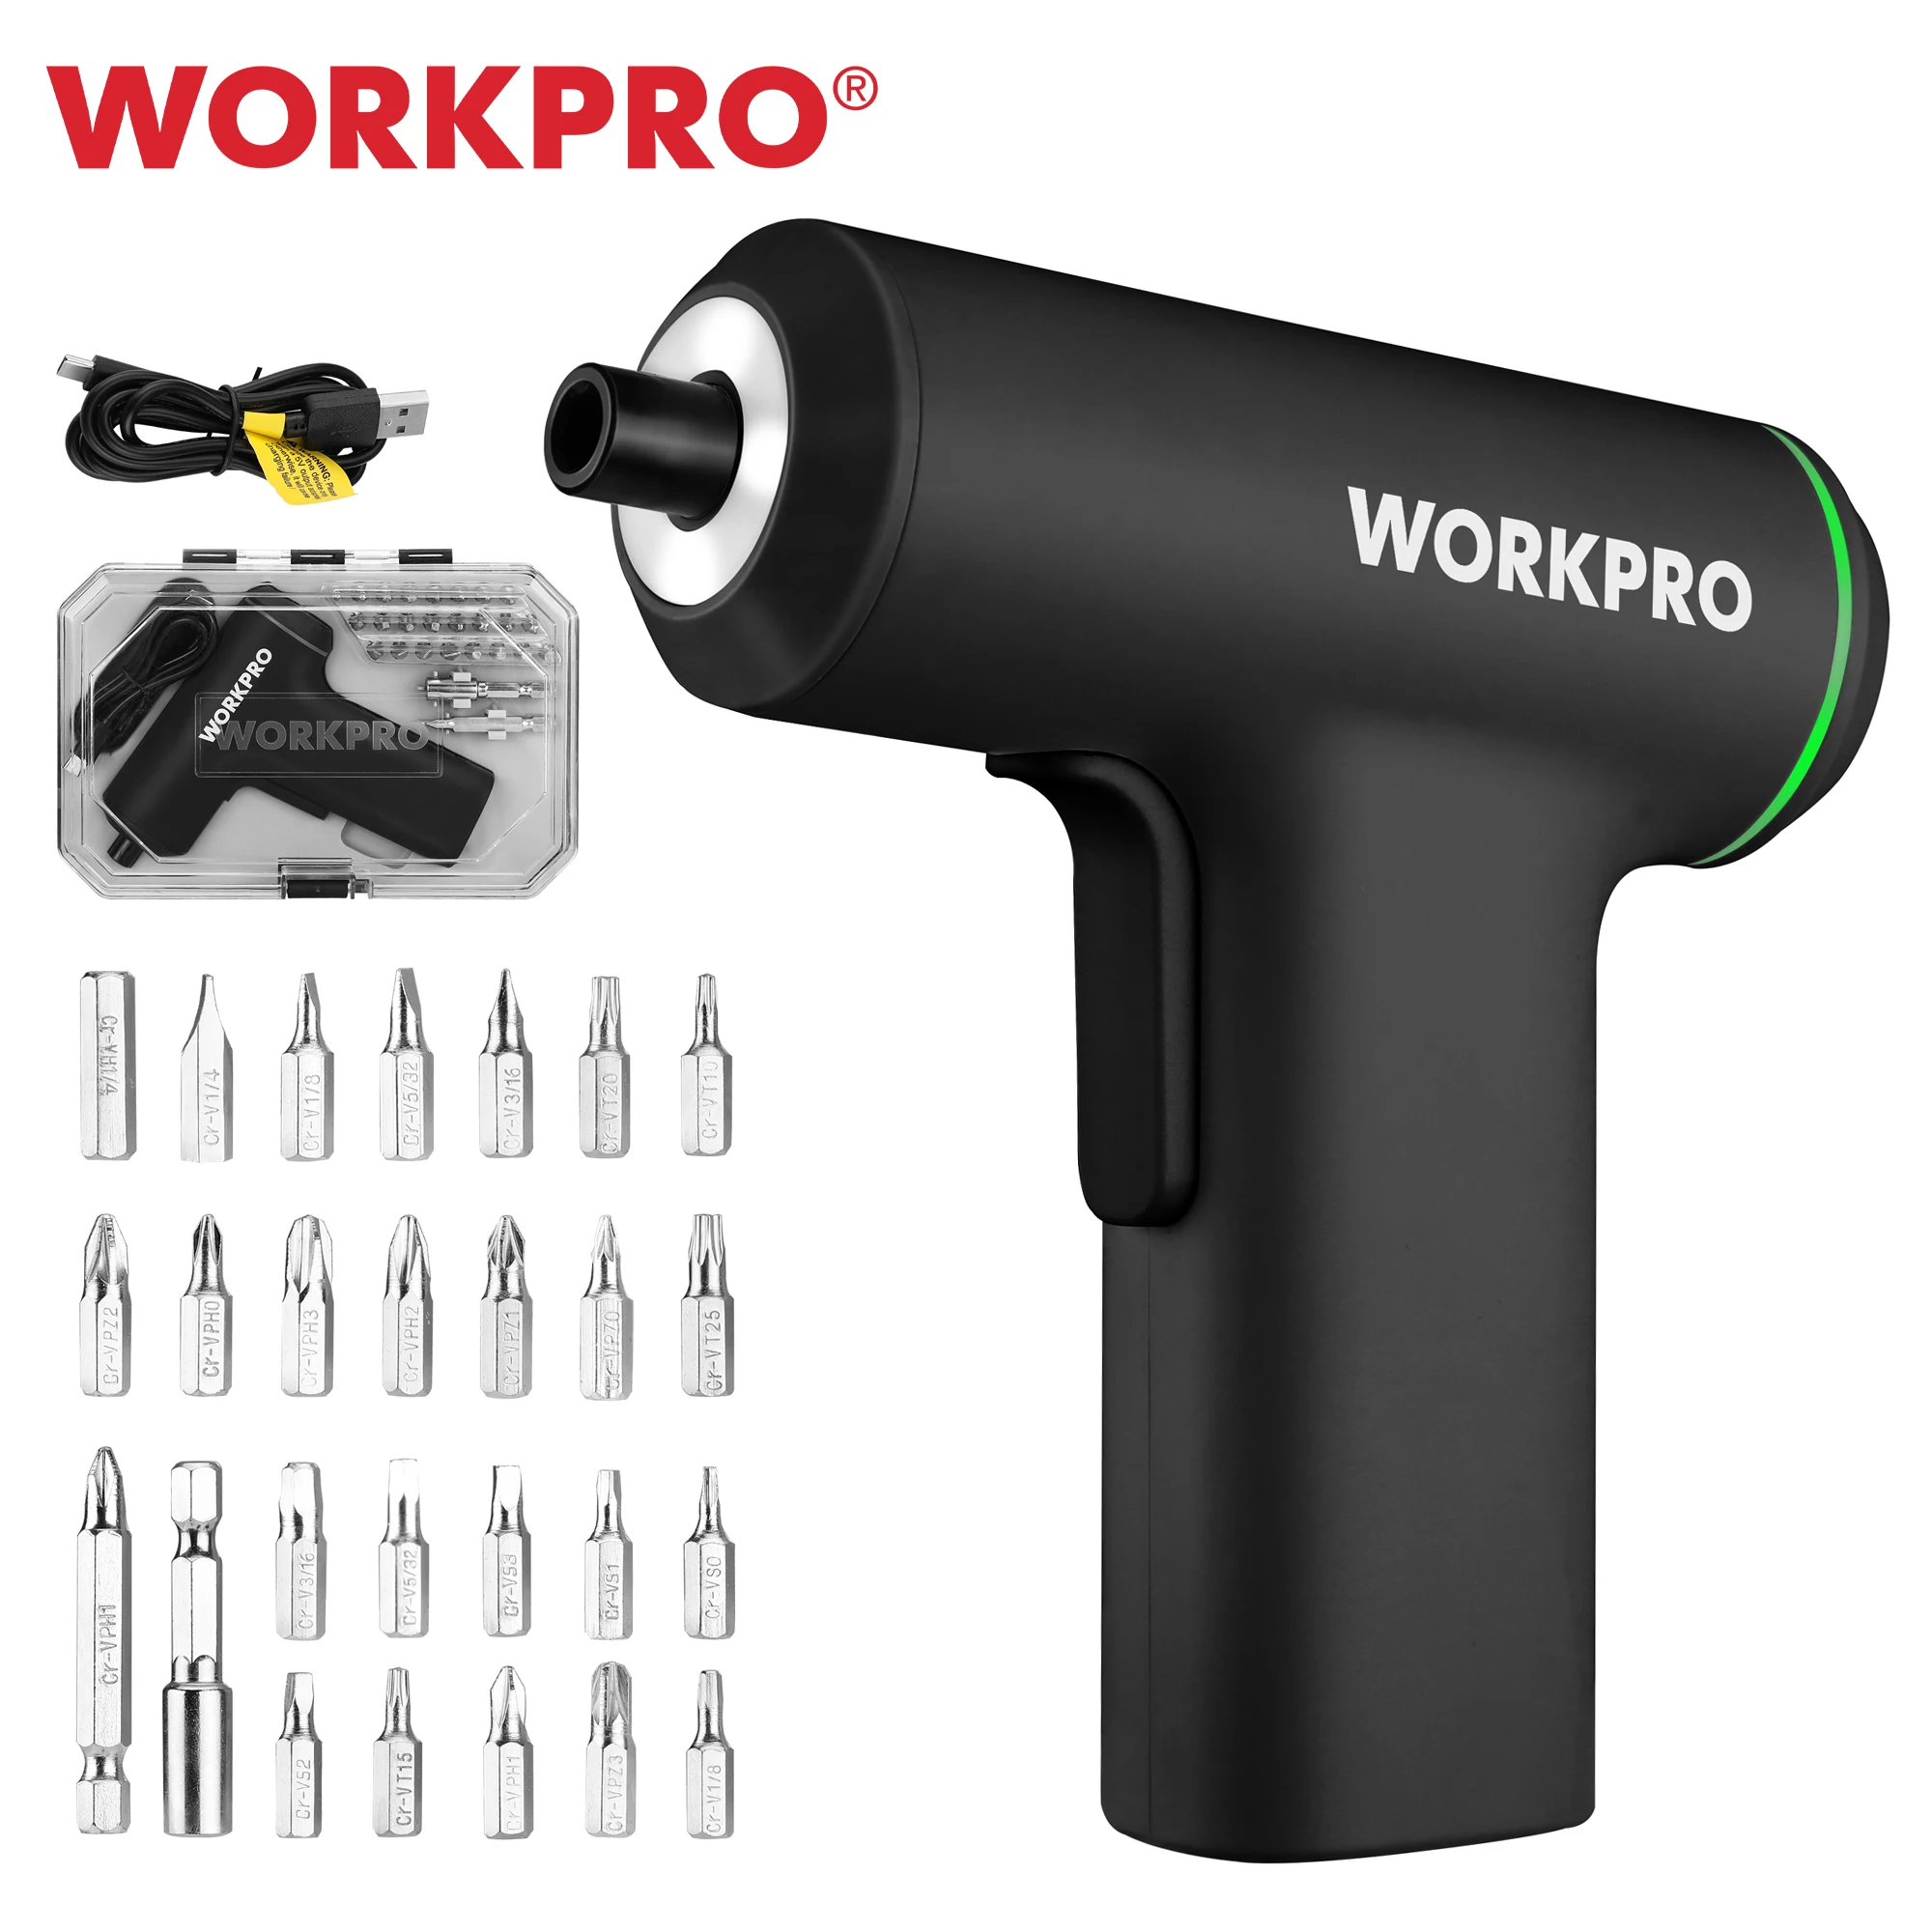 WORKPRO 3.6V Electric Cordless Screwdriver Set USB Rechargeable 1500mah Lithium-ion Battery Mini Drill Power tool Set 7 4 v lithium ion rechargeable battery 1500mah 2200mah 3000mah used in fishing boats drones go karts and other fields